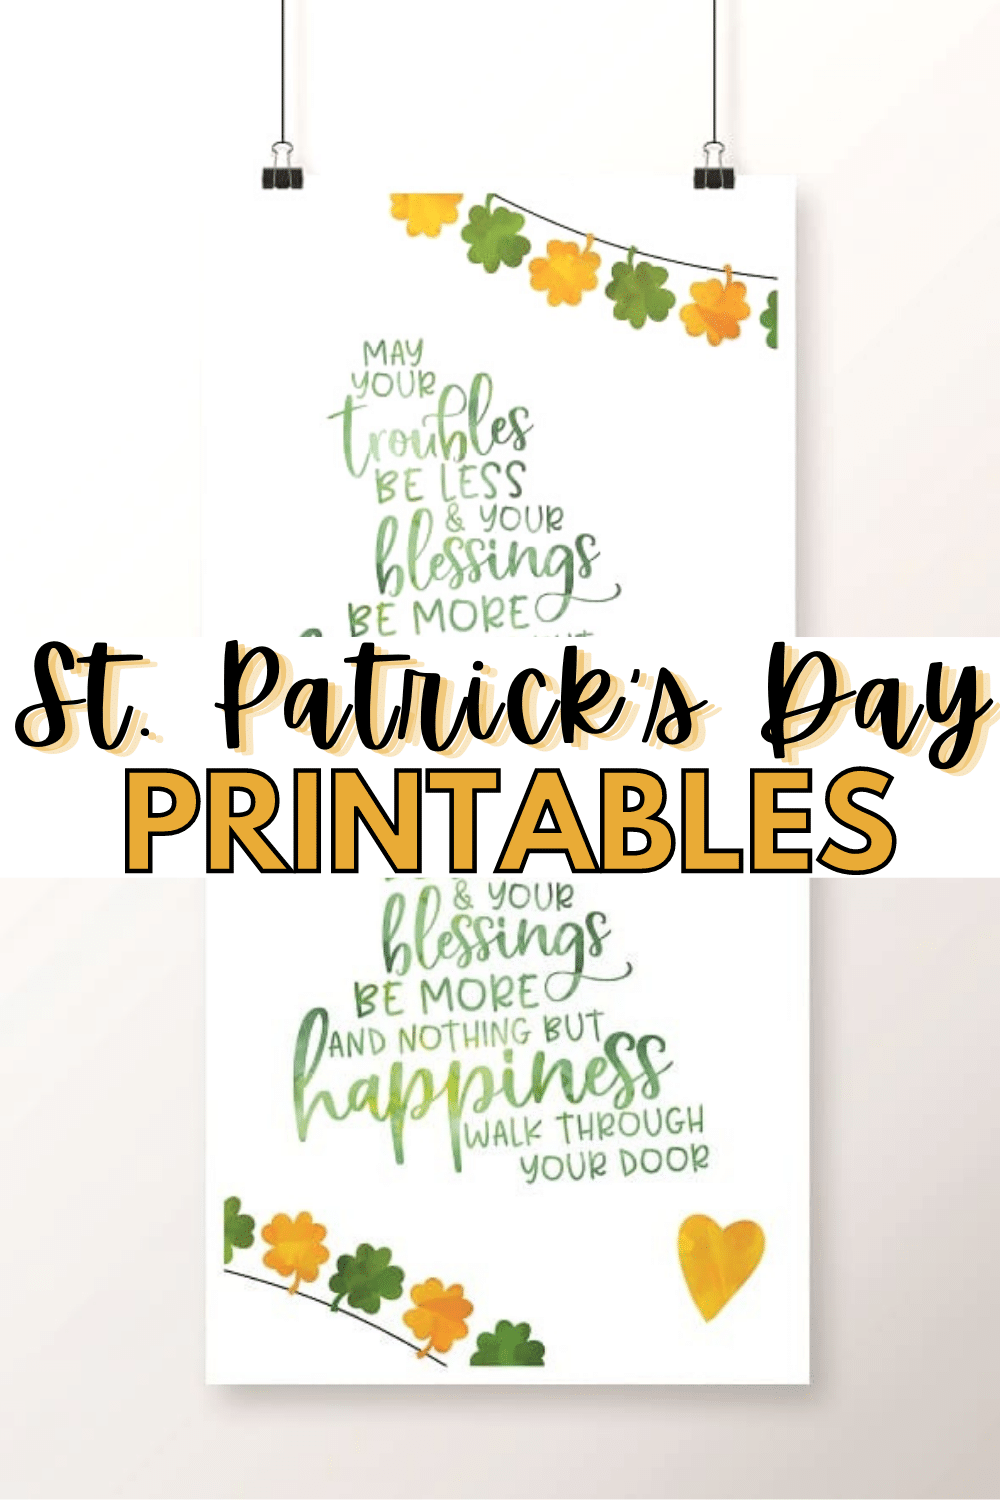 Two cheerful and festive St Patrick's Day printables. Such an easy and inexpensive way to add some Irish cheer to your home for St. Patrick's Day! #StPatricksDay #printables via @wondermomwannab